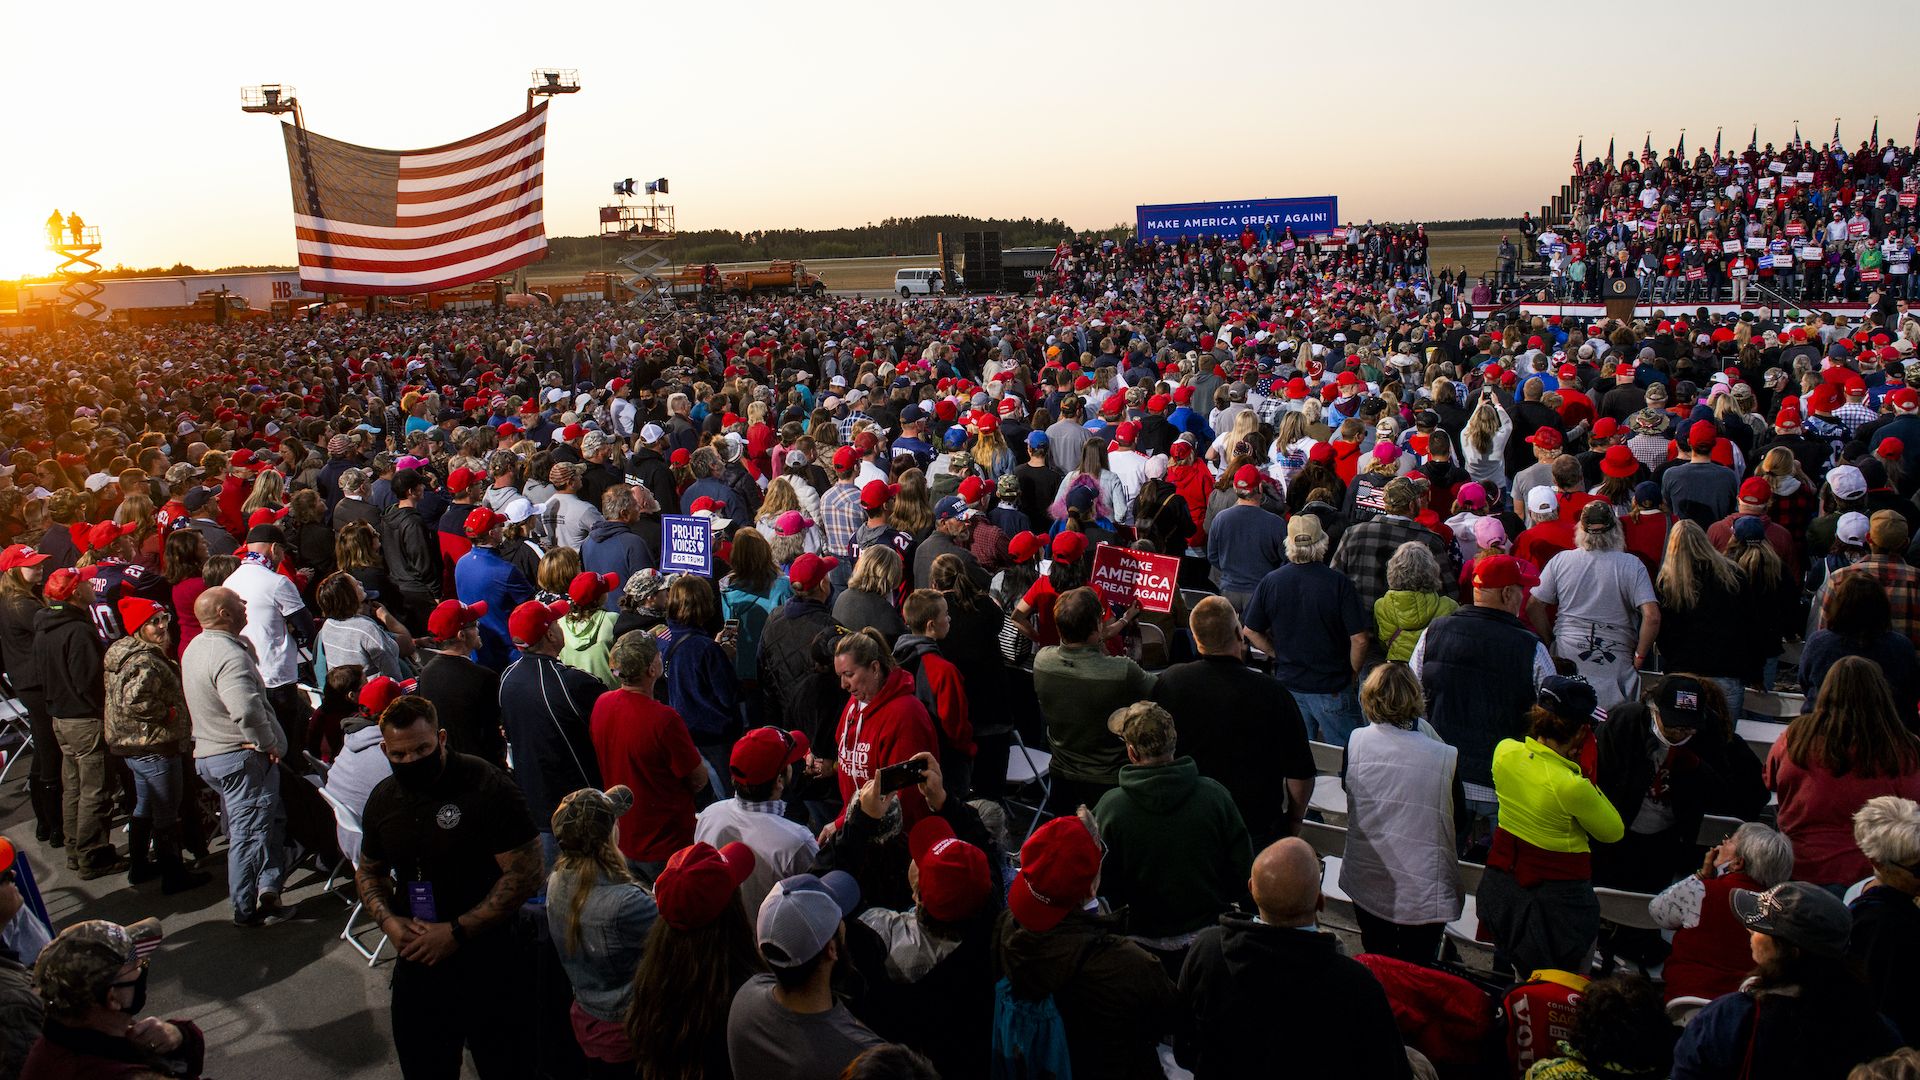 Photo of a packed crowd of people at a Trump event